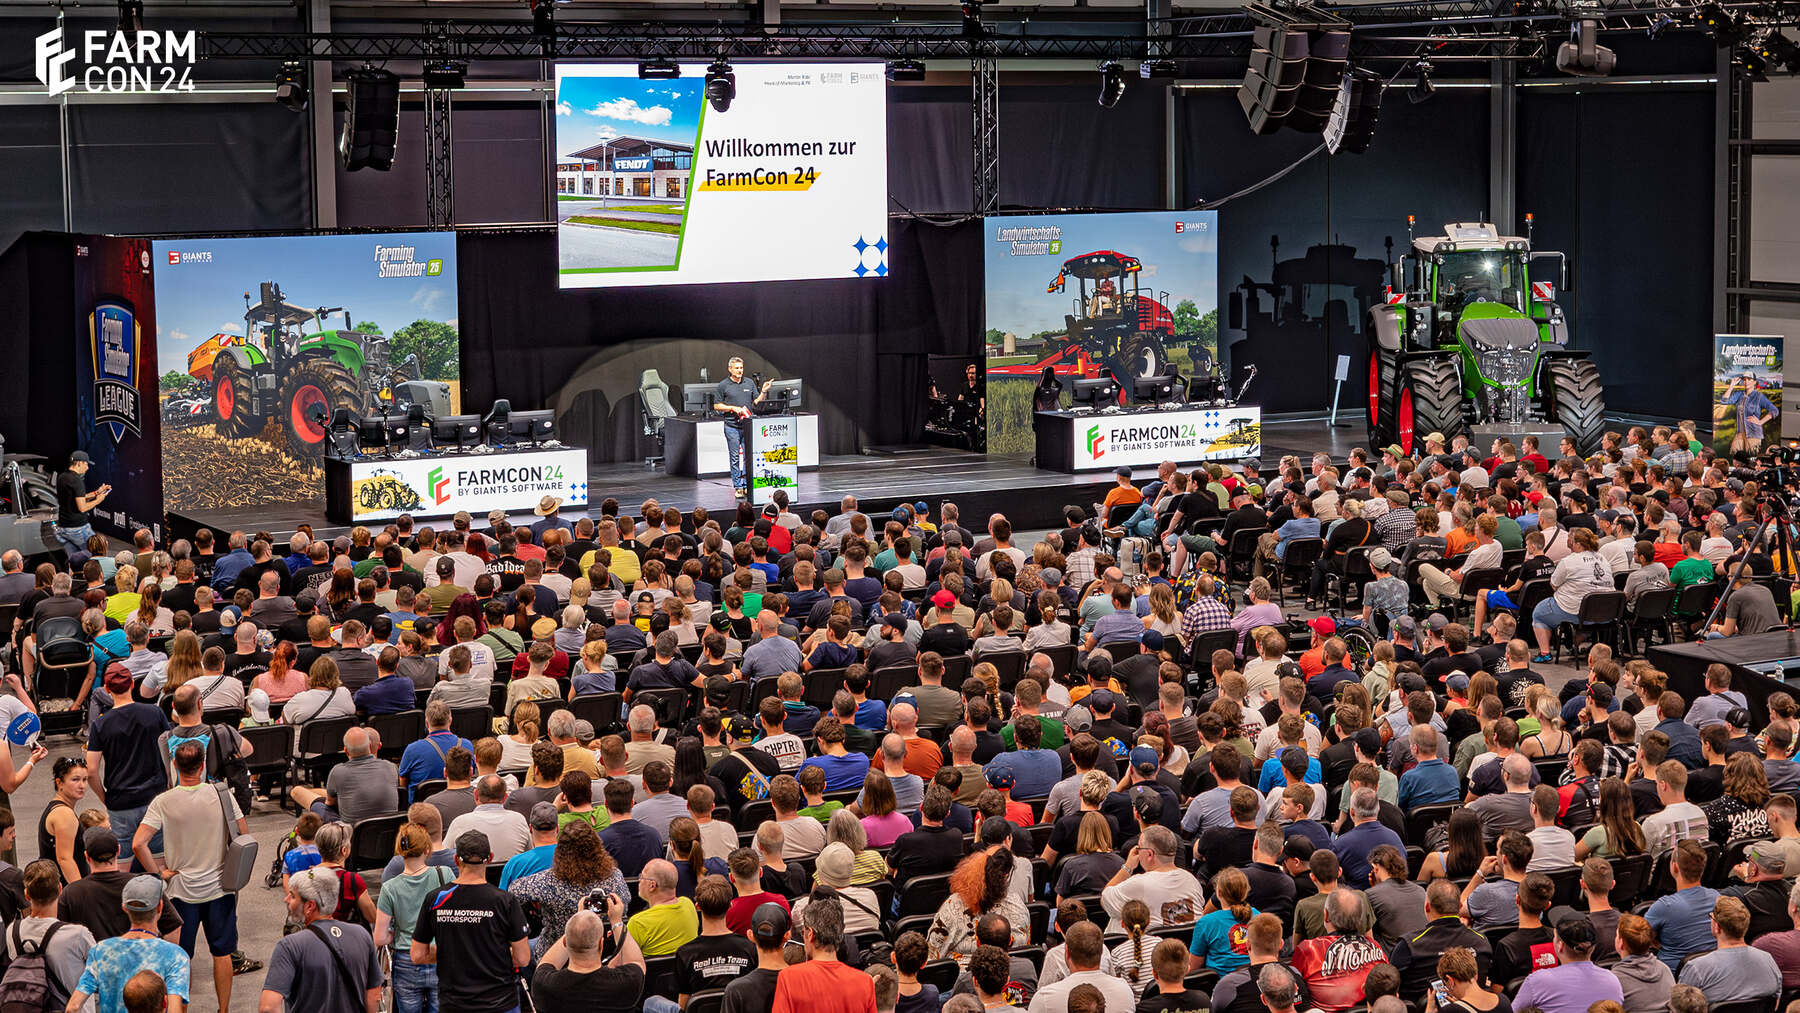 FarmCon 24 was attended by over 3500 people all hyped to see the latest Farming Simulator game